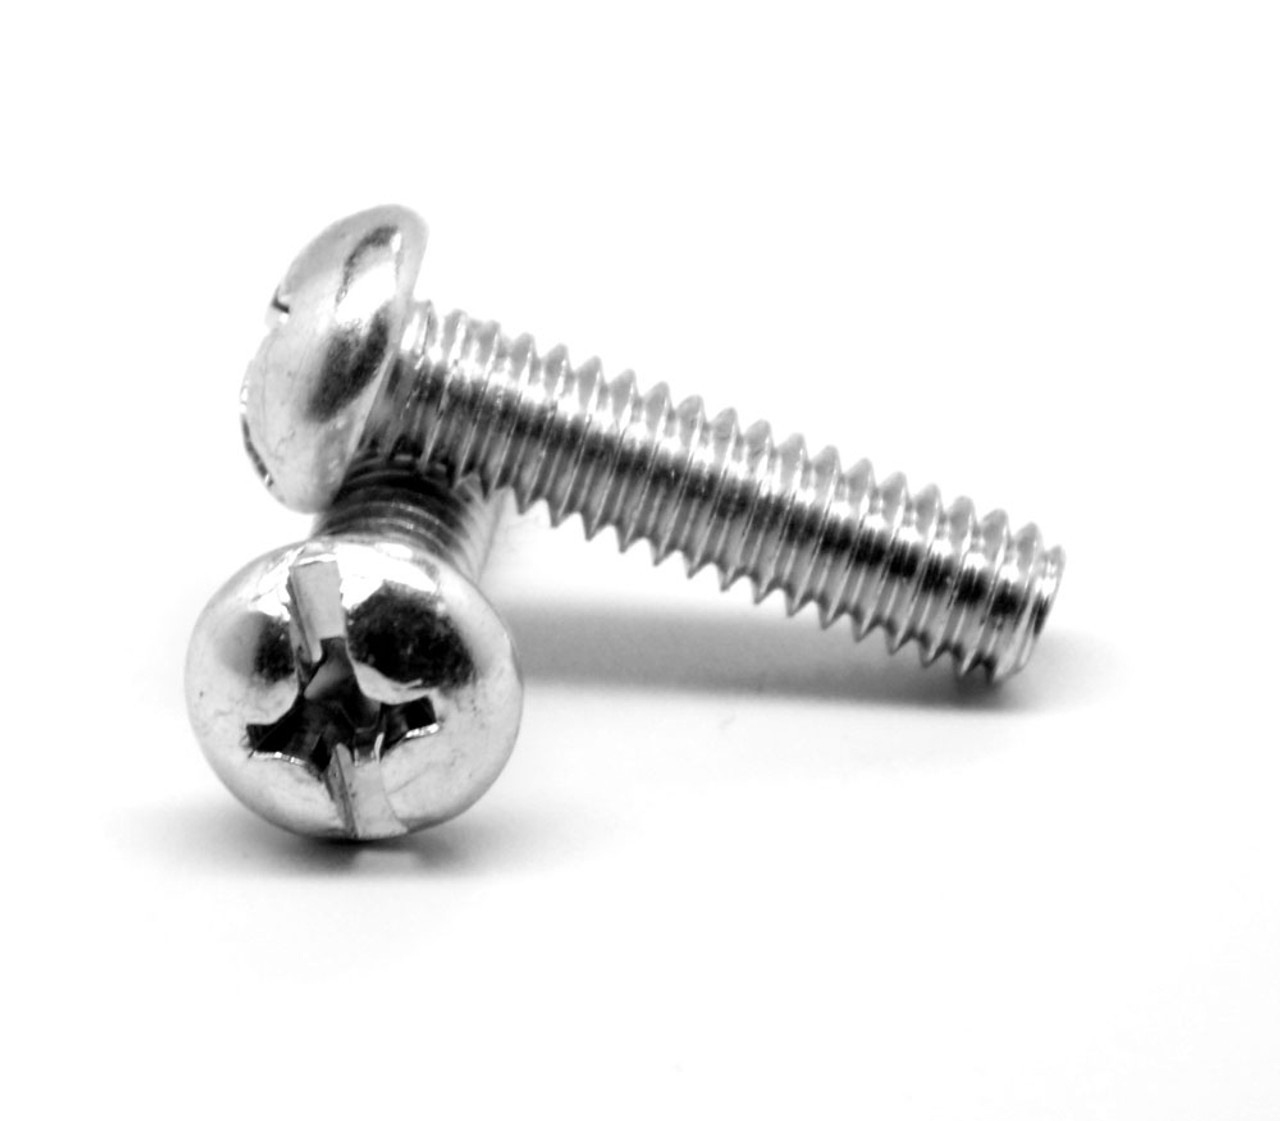 #10-32 x 1/2" (FT) Fine Thread Machine Screw Combo (Phillips/Slotted) Round Head Low Carbon Steel Zinc Plated